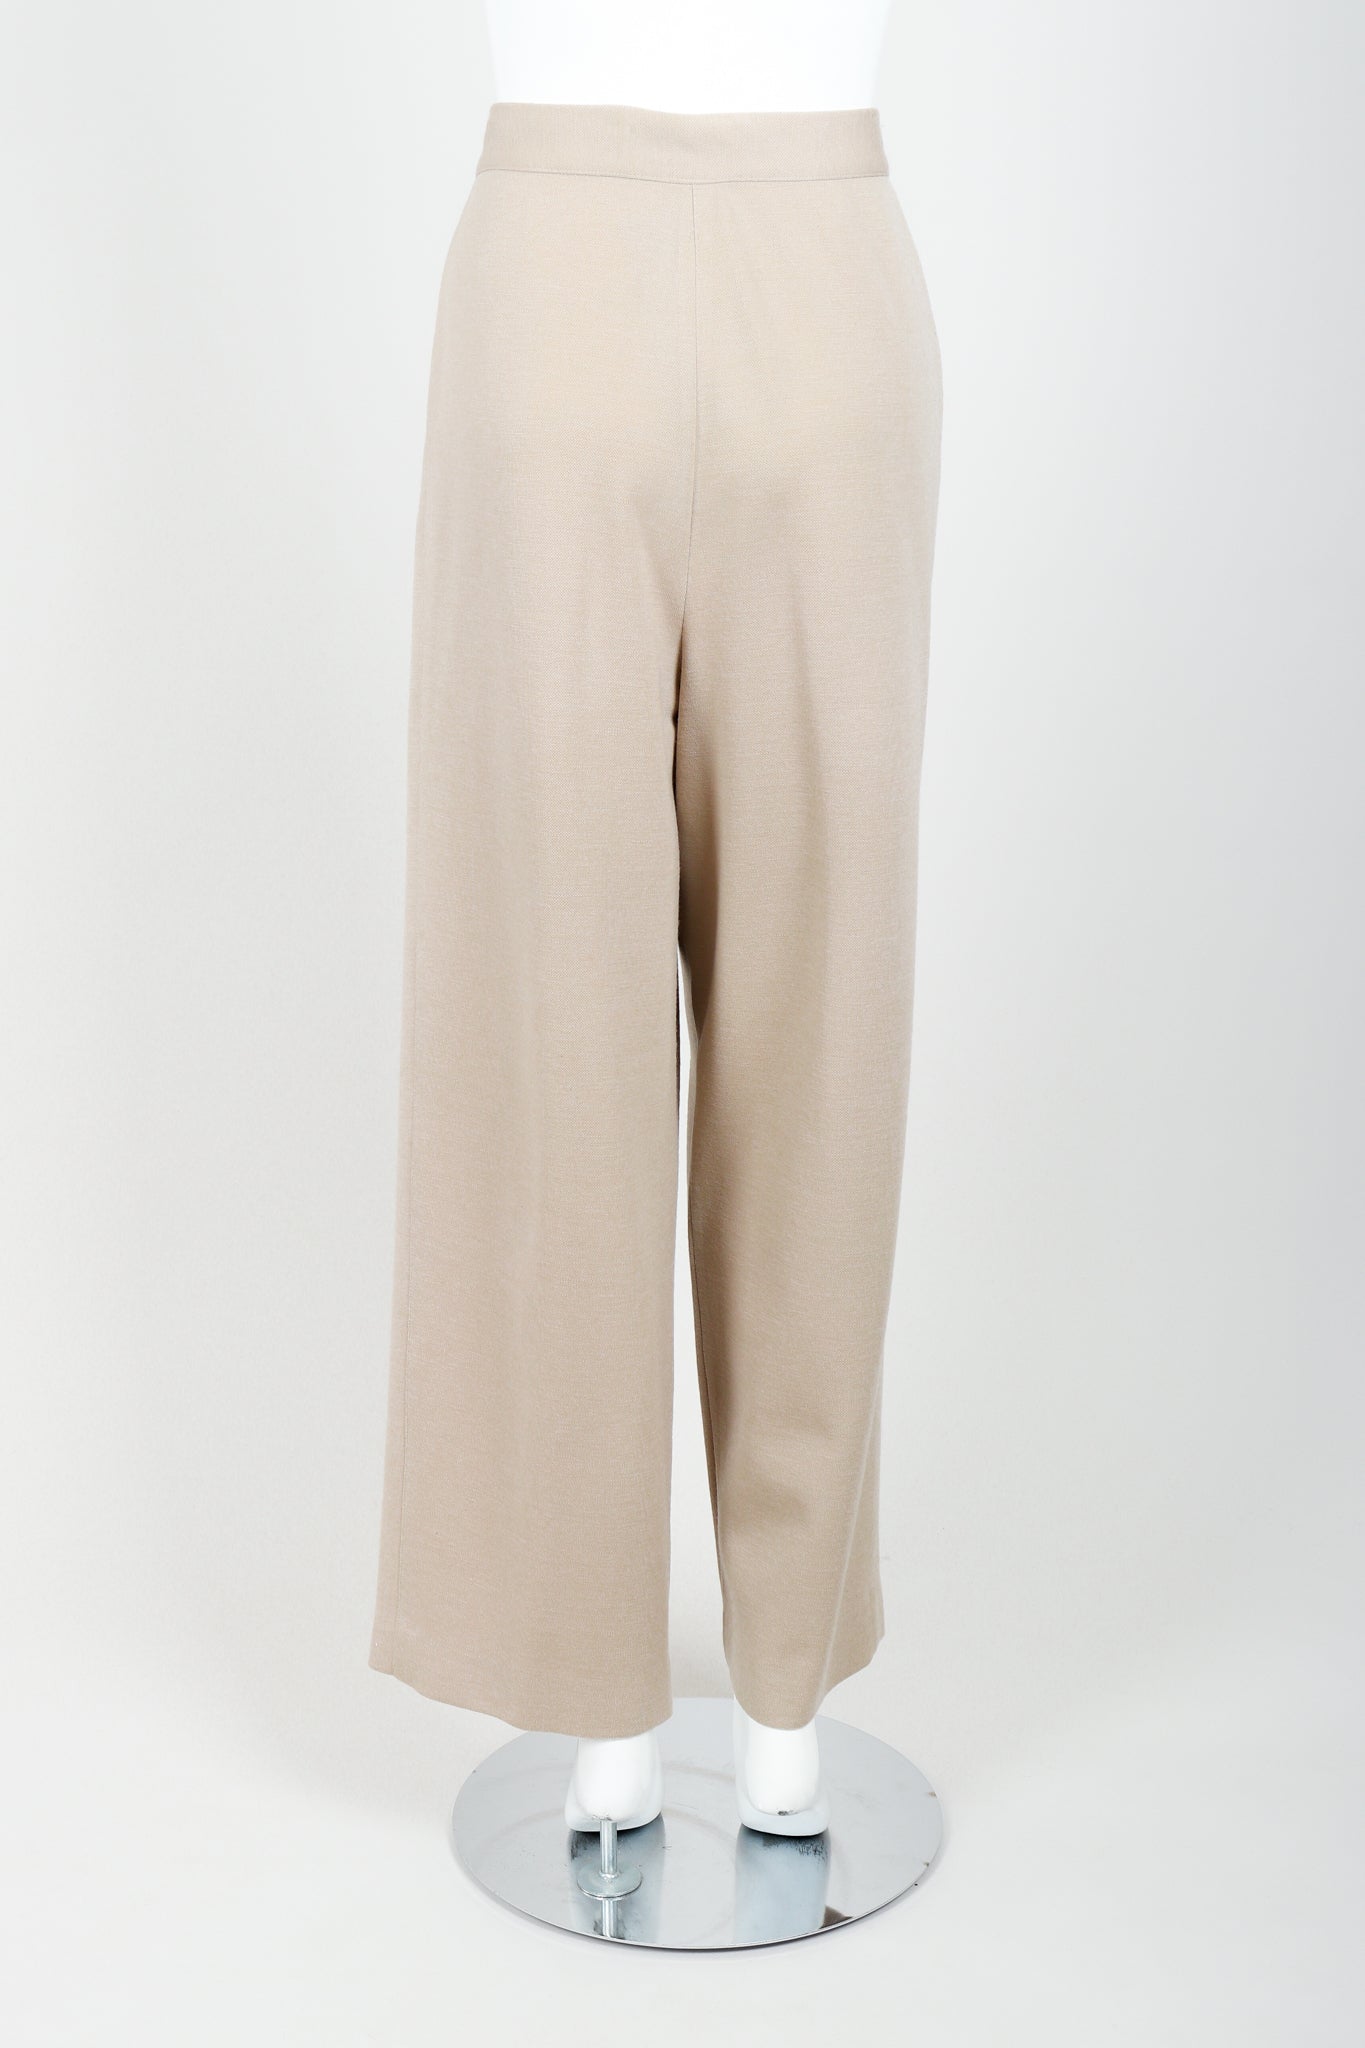 Vintage Sonia Rykiel Sand Beige Knit Pleated Pant on Mannequin back at Recess